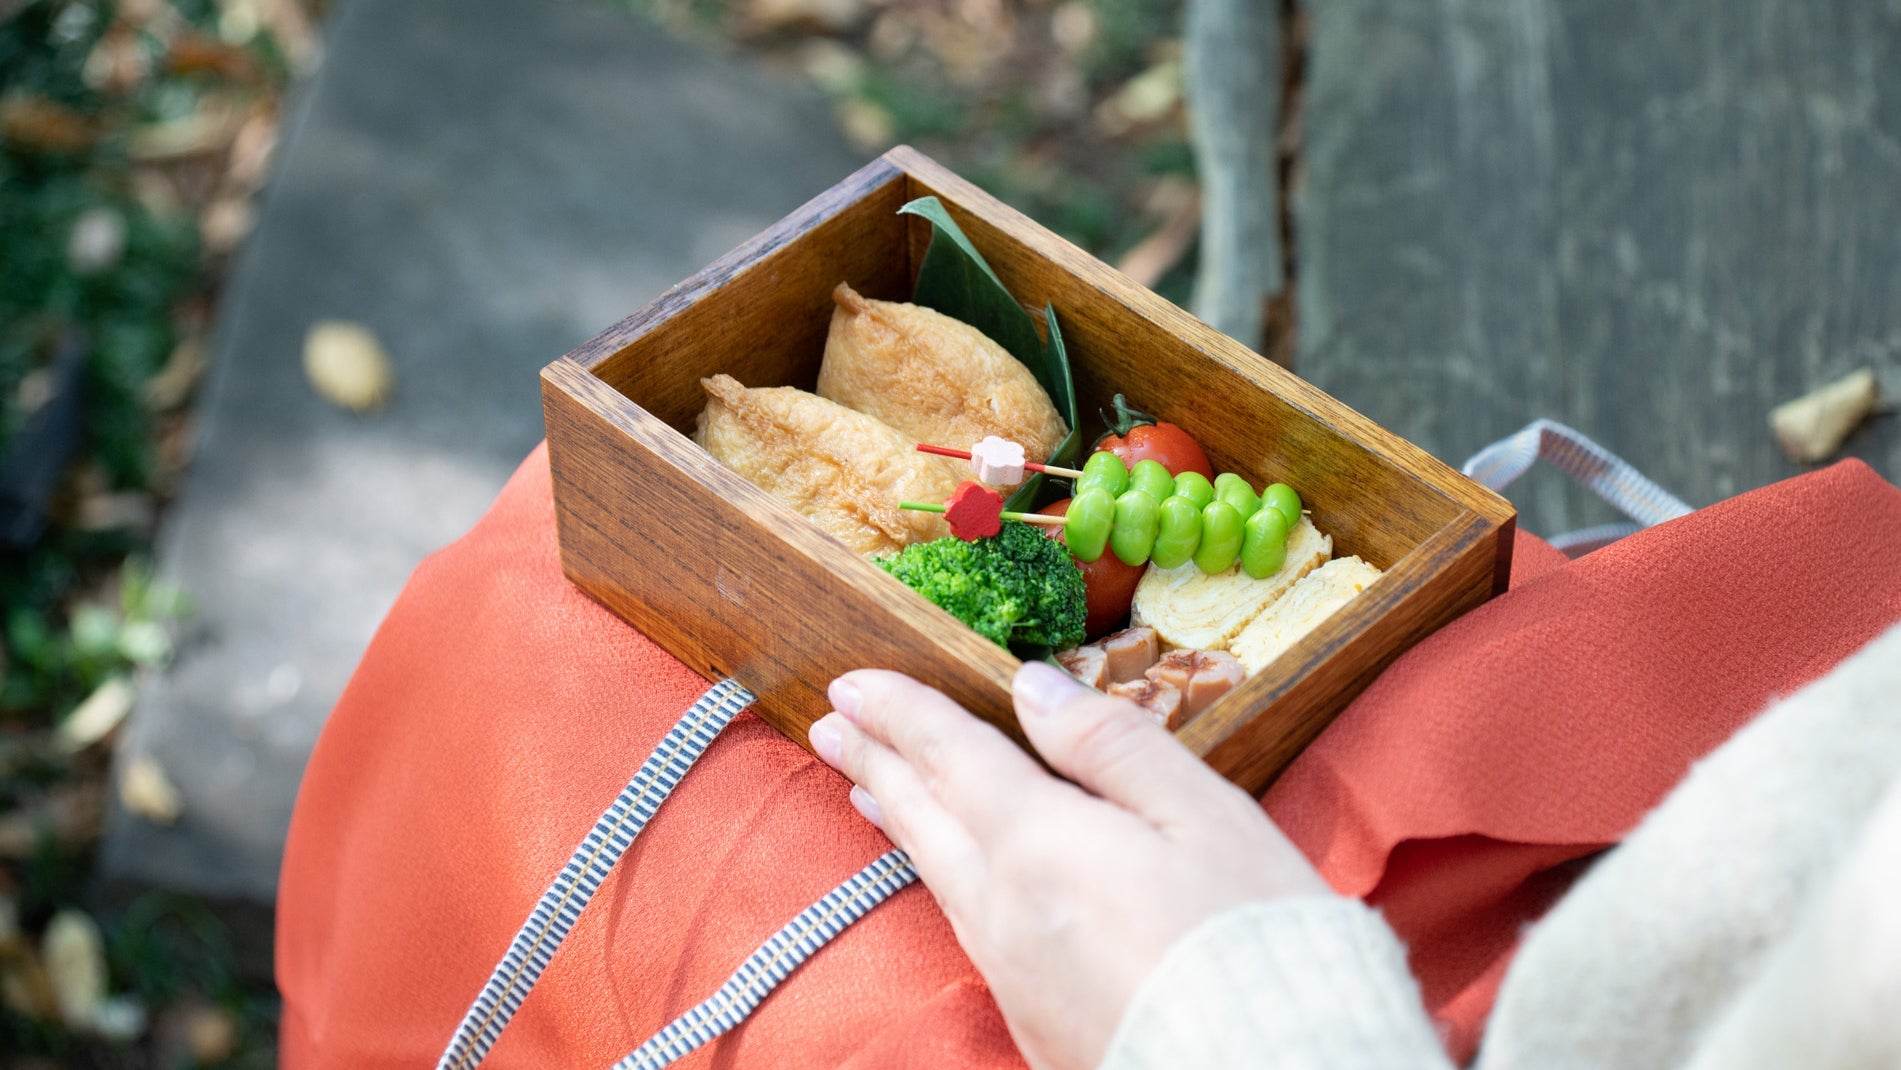 An Autumn Excursion with Japanese Tableware  